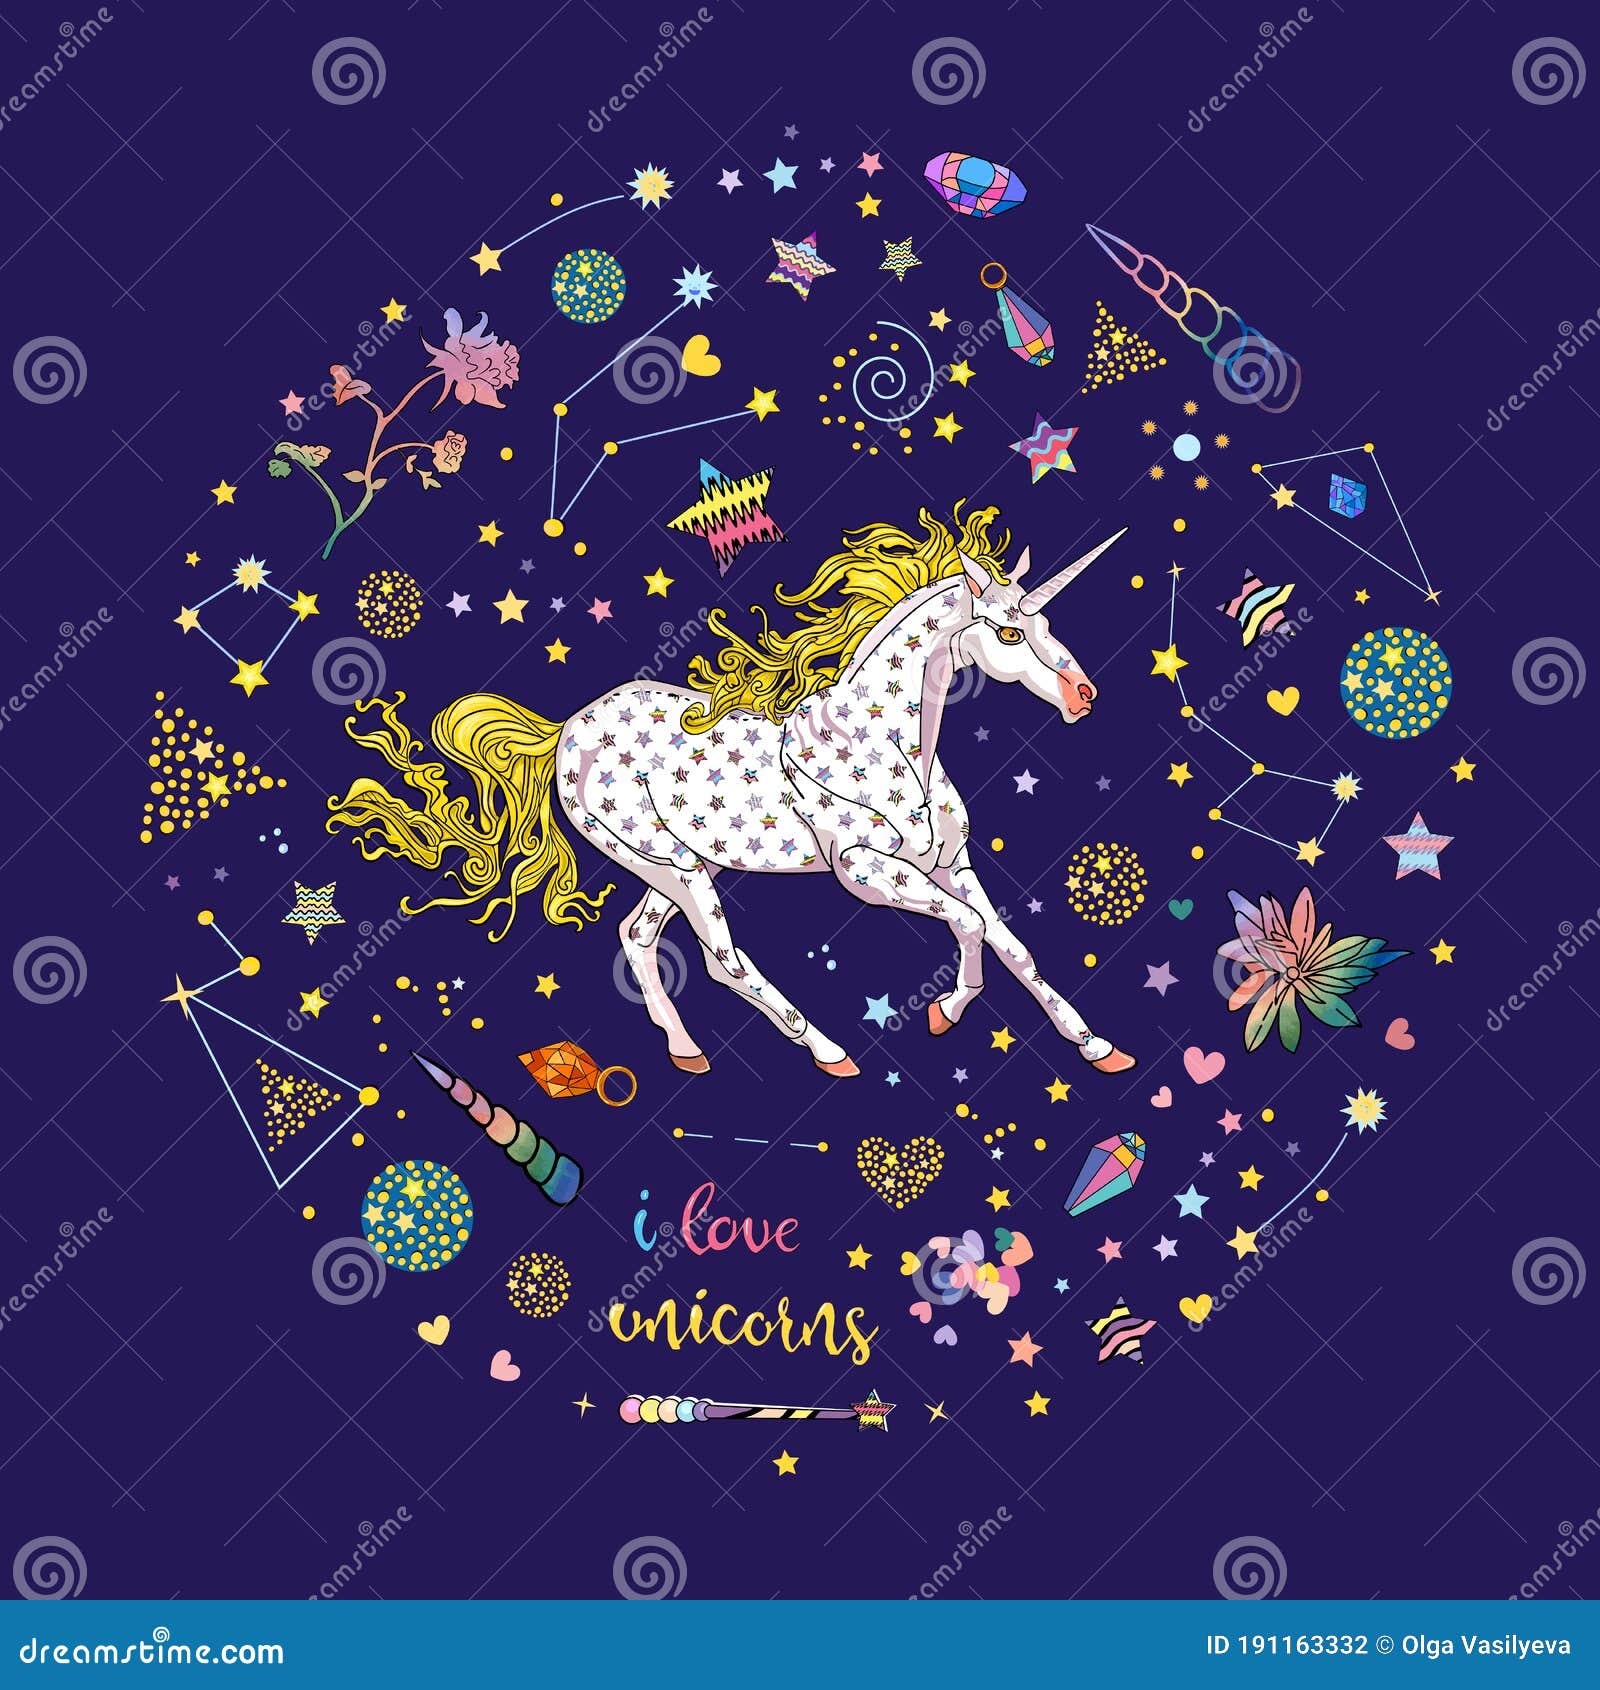 beautiful  of skittish unicorn inside blue square with constellations, stars, crystals  on blue